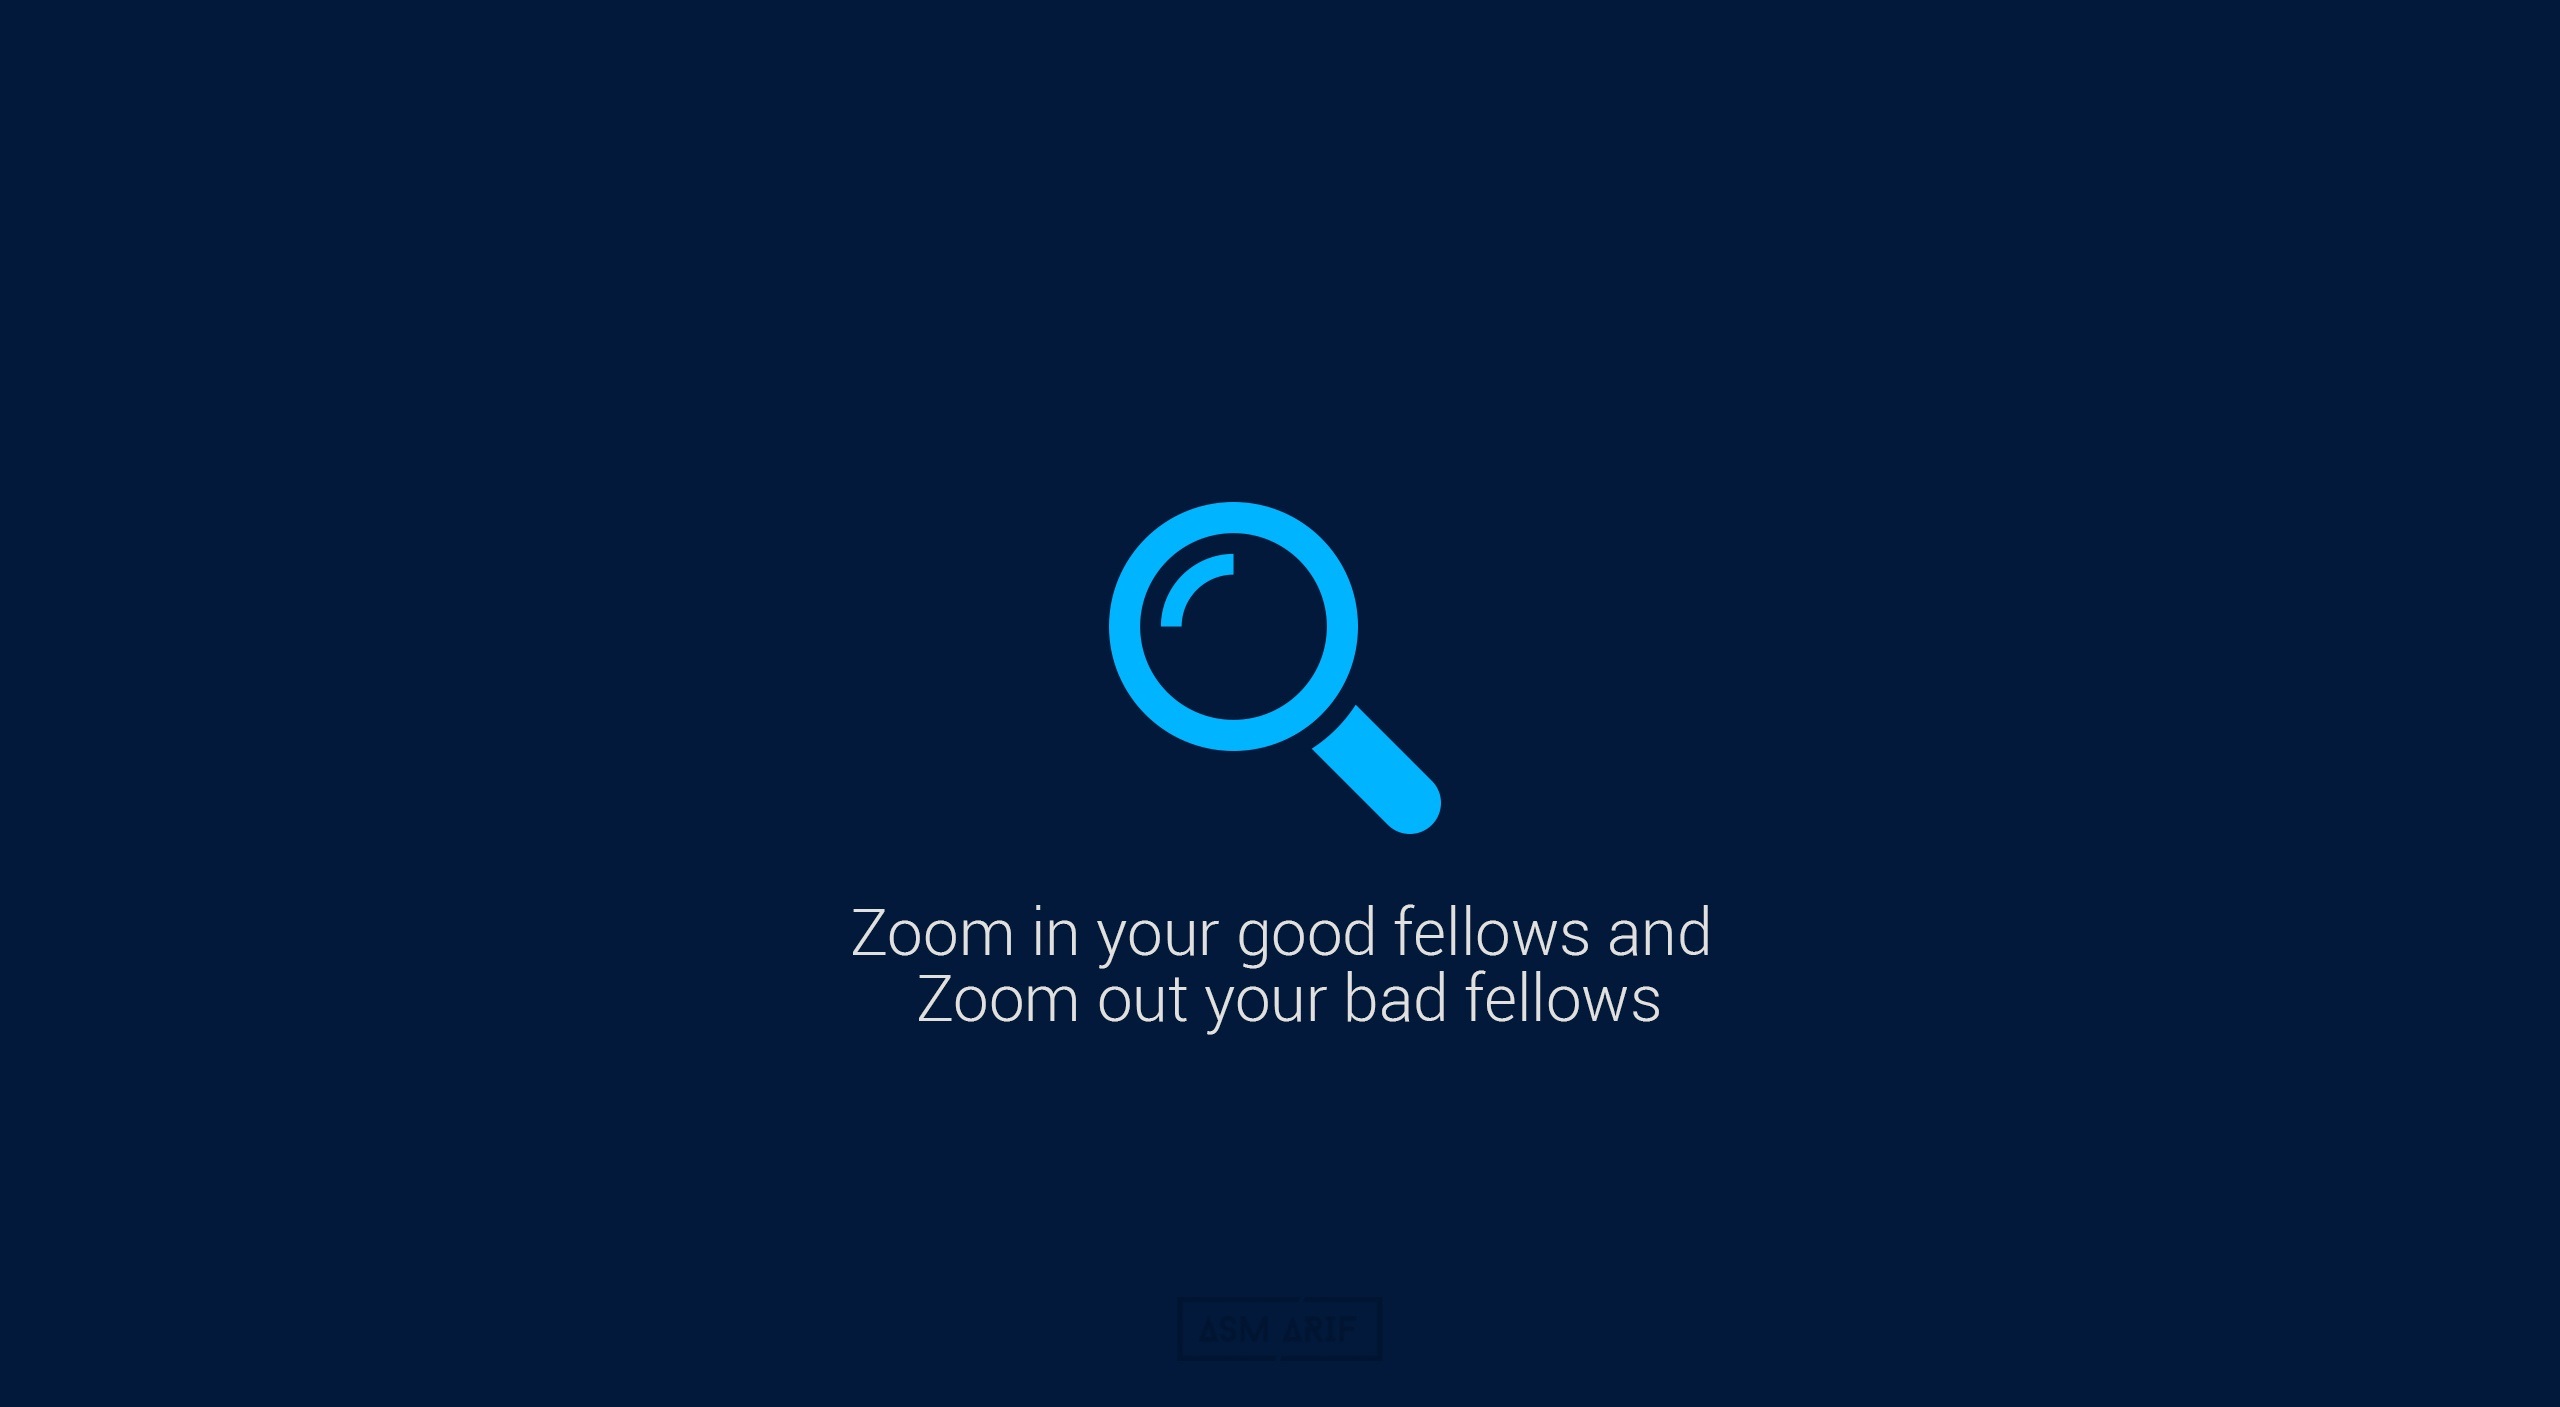 General 2560x1407 blue notes icons motivational quote blue background text magnifying glass